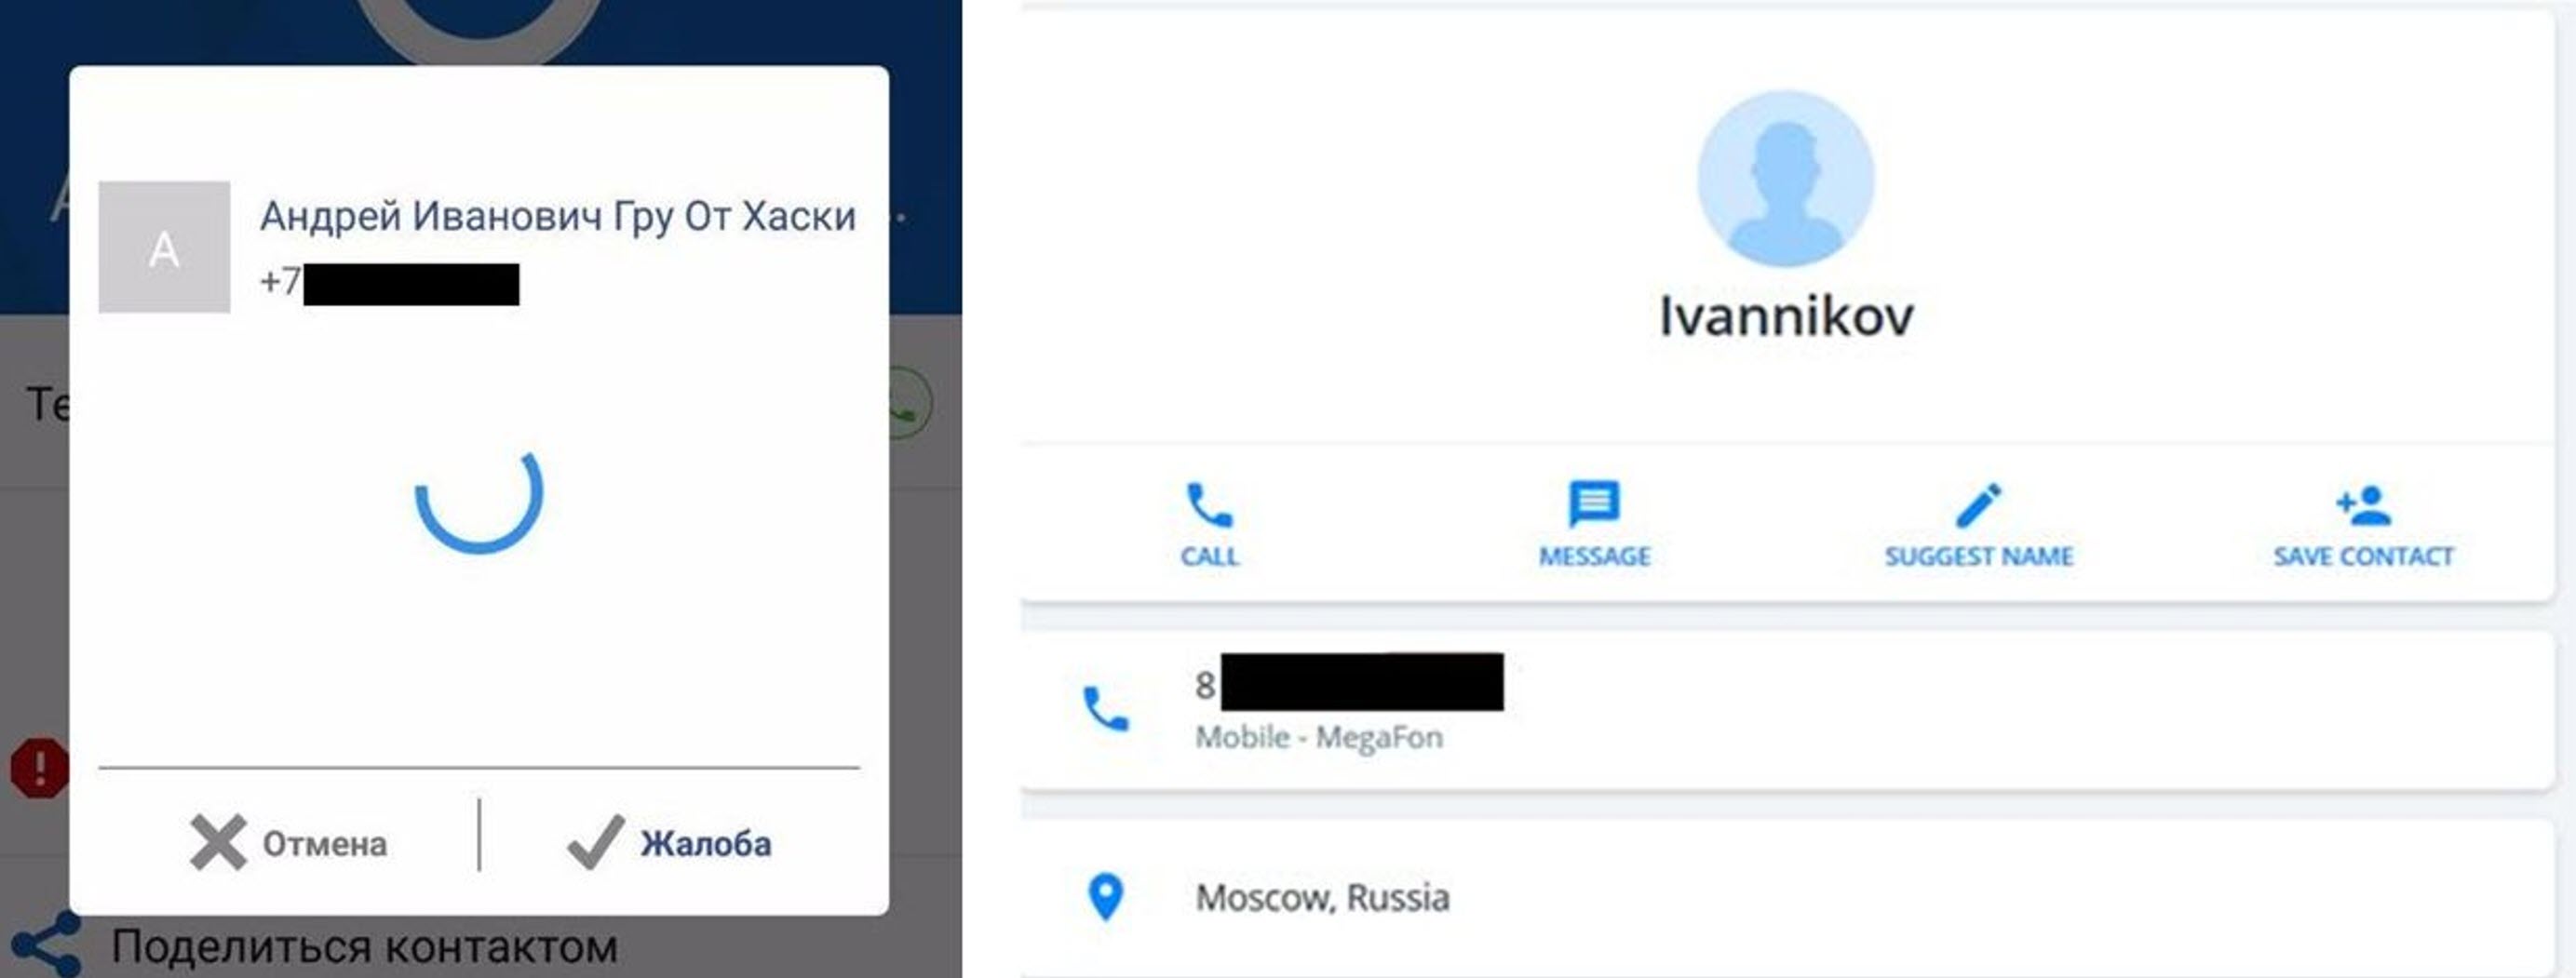 Using Phone Contact Book Apps For Digital Research - bellingcat